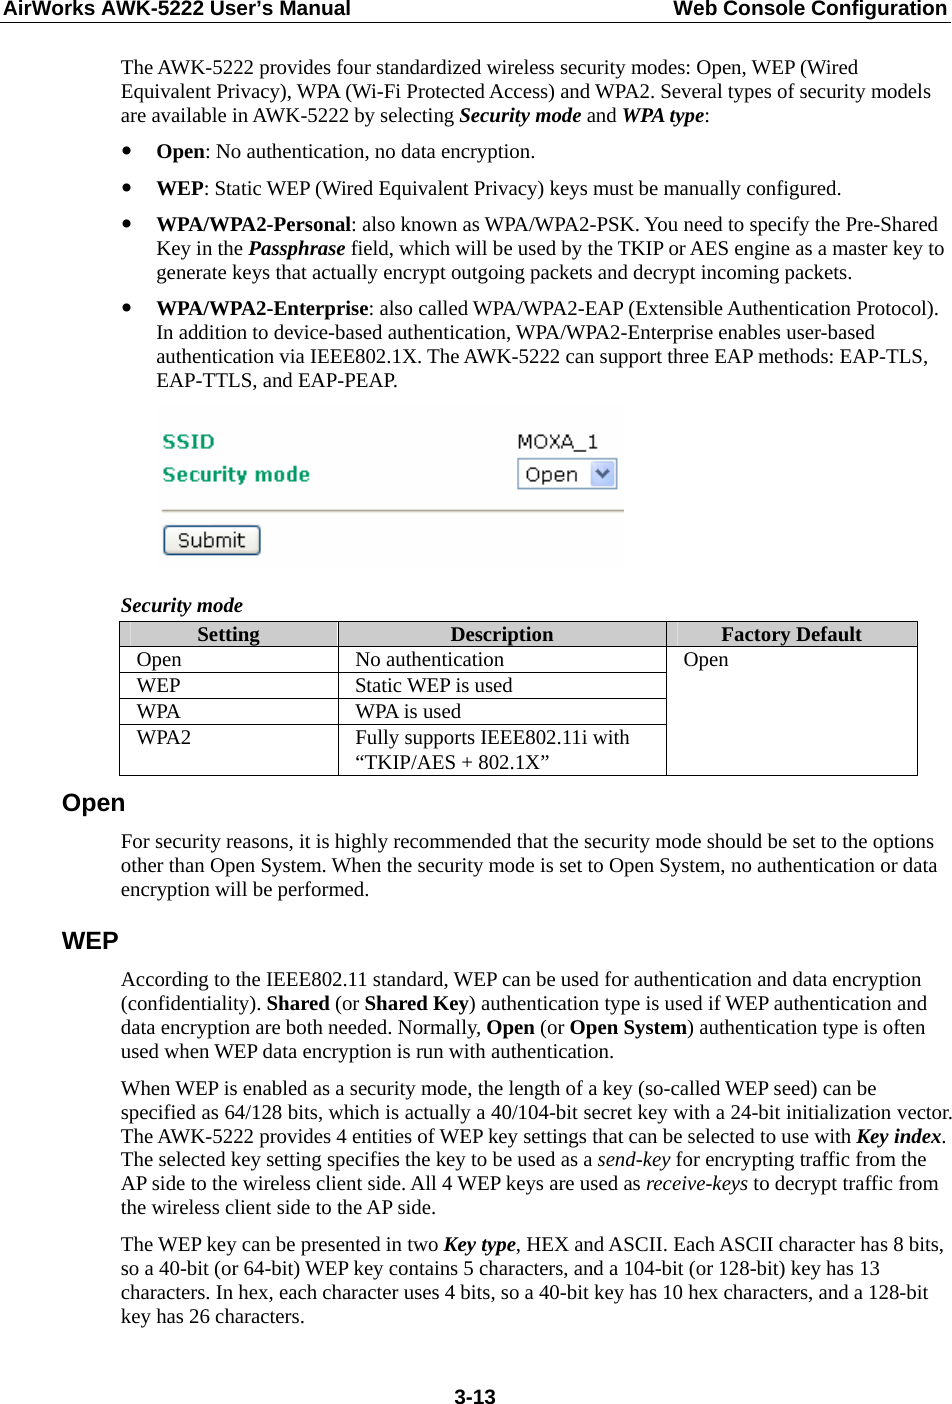 AirWorks AWK-5222 User’s Manual  Web Console Configuration  3-13The AWK-5222 provides four standardized wireless security modes: Open, WEP (Wired Equivalent Privacy), WPA (Wi-Fi Protected Access) and WPA2. Several types of security models are available in AWK-5222 by selecting Security mode and WPA type: y Open: No authentication, no data encryption. y WEP: Static WEP (Wired Equivalent Privacy) keys must be manually configured. y WPA/WPA2-Personal: also known as WPA/WPA2-PSK. You need to specify the Pre-Shared Key in the Passphrase field, which will be used by the TKIP or AES engine as a master key to generate keys that actually encrypt outgoing packets and decrypt incoming packets. y WPA/WPA2-Enterprise: also called WPA/WPA2-EAP (Extensible Authentication Protocol). In addition to device-based authentication, WPA/WPA2-Enterprise enables user-based authentication via IEEE802.1X. The AWK-5222 can support three EAP methods: EAP-TLS, EAP-TTLS, and EAP-PEAP.  Security mode Setting  Description  Factory Default Open No authentication WEP Static WEP is used WPA  WPA is used WPA2  Fully supports IEEE802.11i with “TKIP/AES + 802.1X” Open Open For security reasons, it is highly recommended that the security mode should be set to the options other than Open System. When the security mode is set to Open System, no authentication or data encryption will be performed. WEP According to the IEEE802.11 standard, WEP can be used for authentication and data encryption (confidentiality). Shared (or Shared Key) authentication type is used if WEP authentication and data encryption are both needed. Normally, Open (or Open System) authentication type is often used when WEP data encryption is run with authentication. When WEP is enabled as a security mode, the length of a key (so-called WEP seed) can be specified as 64/128 bits, which is actually a 40/104-bit secret key with a 24-bit initialization vector. The AWK-5222 provides 4 entities of WEP key settings that can be selected to use with Key index. The selected key setting specifies the key to be used as a send-key for encrypting traffic from the AP side to the wireless client side. All 4 WEP keys are used as receive-keys to decrypt traffic from the wireless client side to the AP side. The WEP key can be presented in two Key type, HEX and ASCII. Each ASCII character has 8 bits, so a 40-bit (or 64-bit) WEP key contains 5 characters, and a 104-bit (or 128-bit) key has 13 characters. In hex, each character uses 4 bits, so a 40-bit key has 10 hex characters, and a 128-bit key has 26 characters. 